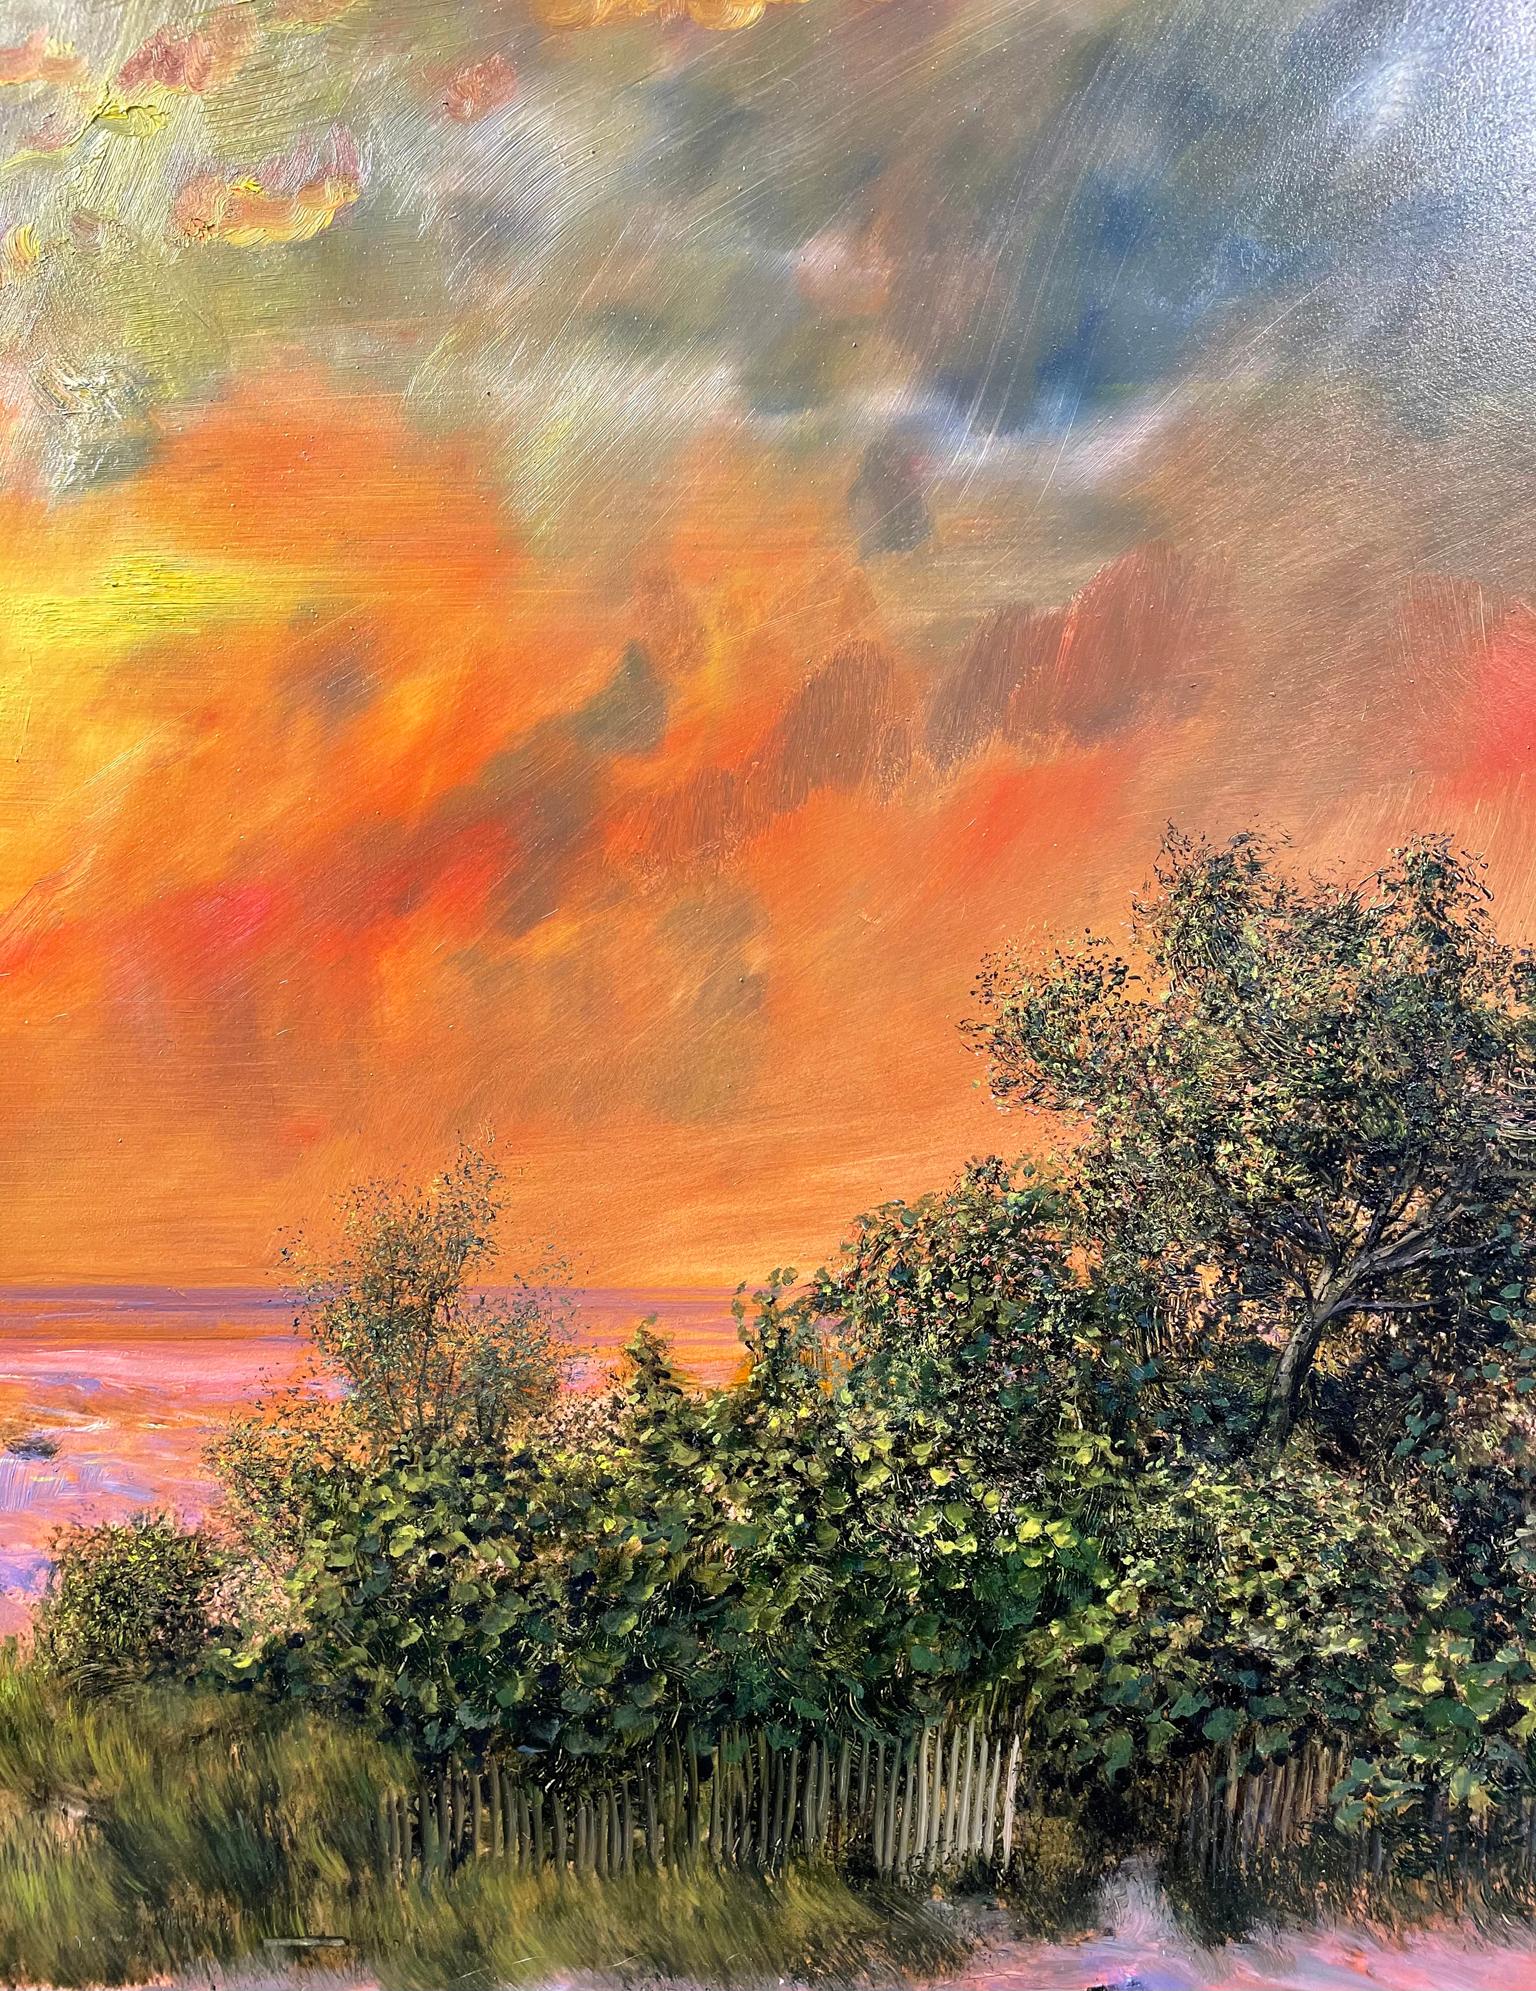 Florida Ocean Sunset - Painting by Nicholas Oberling